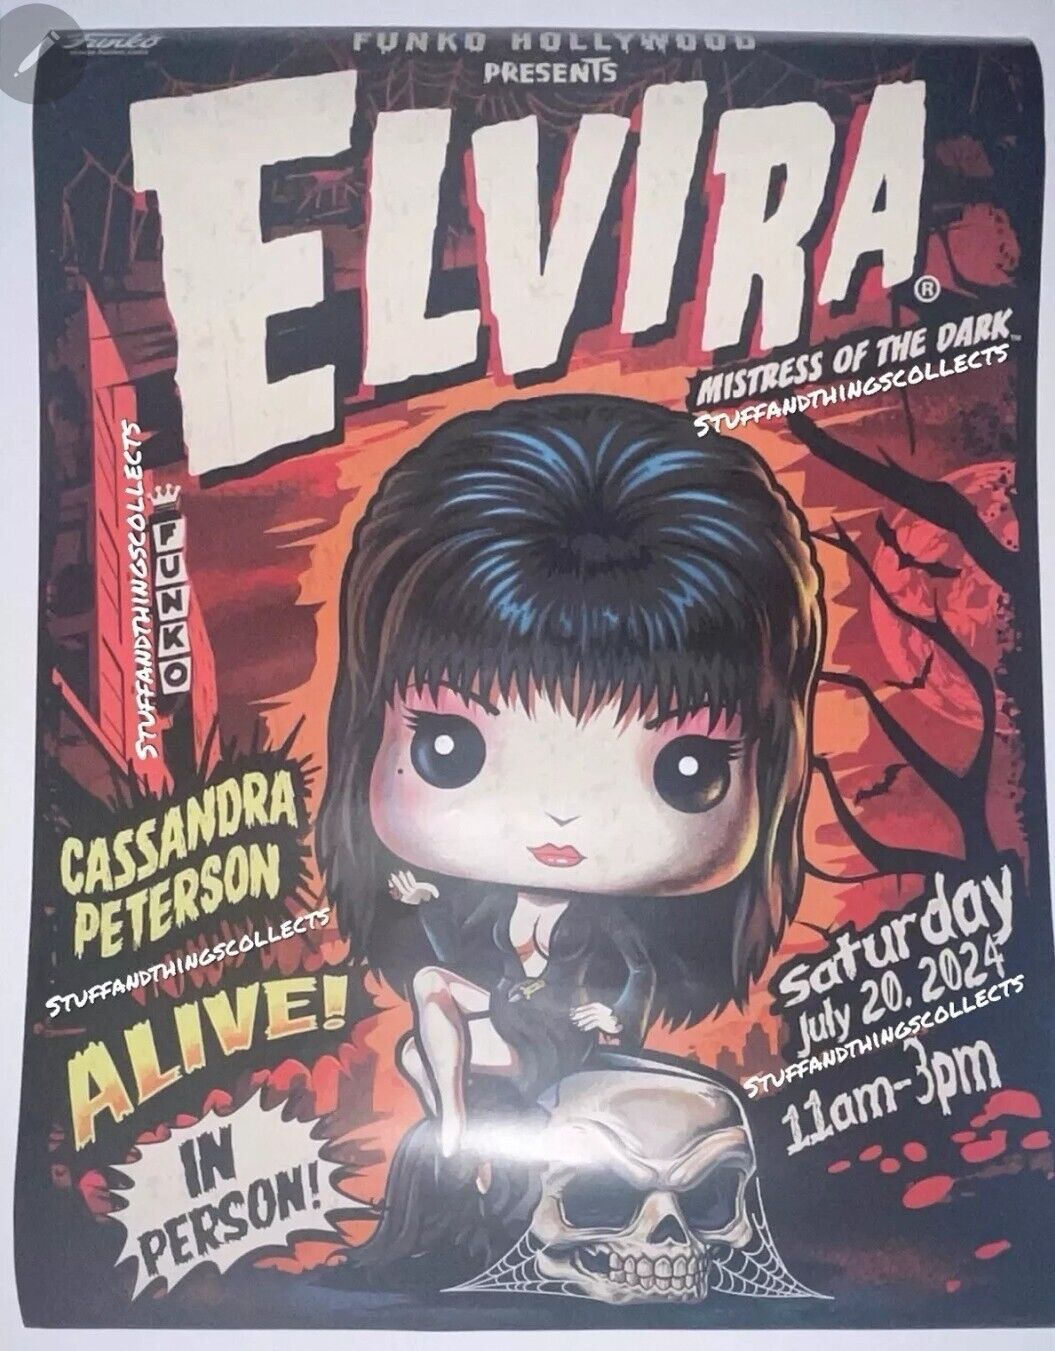 Funko Pop Elvira-Funko Hollywood-Celebrity Appearance Exclusive Poster